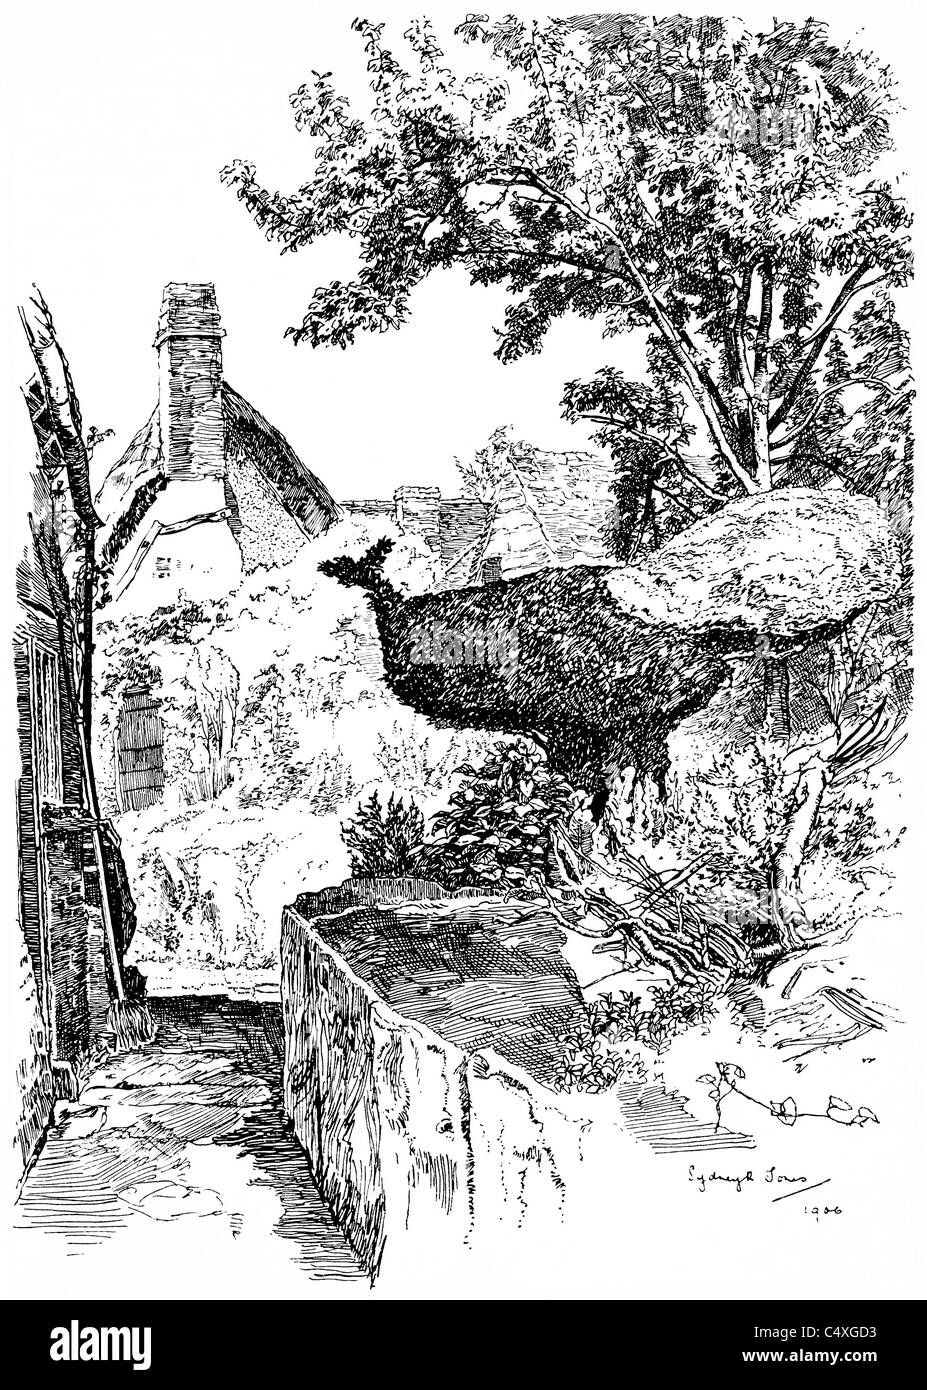 Wellford-on-Avon, Gloucestershire - pen and ink illustration from 'Old English Country Cottages' by Charles Holme, 1906. Stock Photo